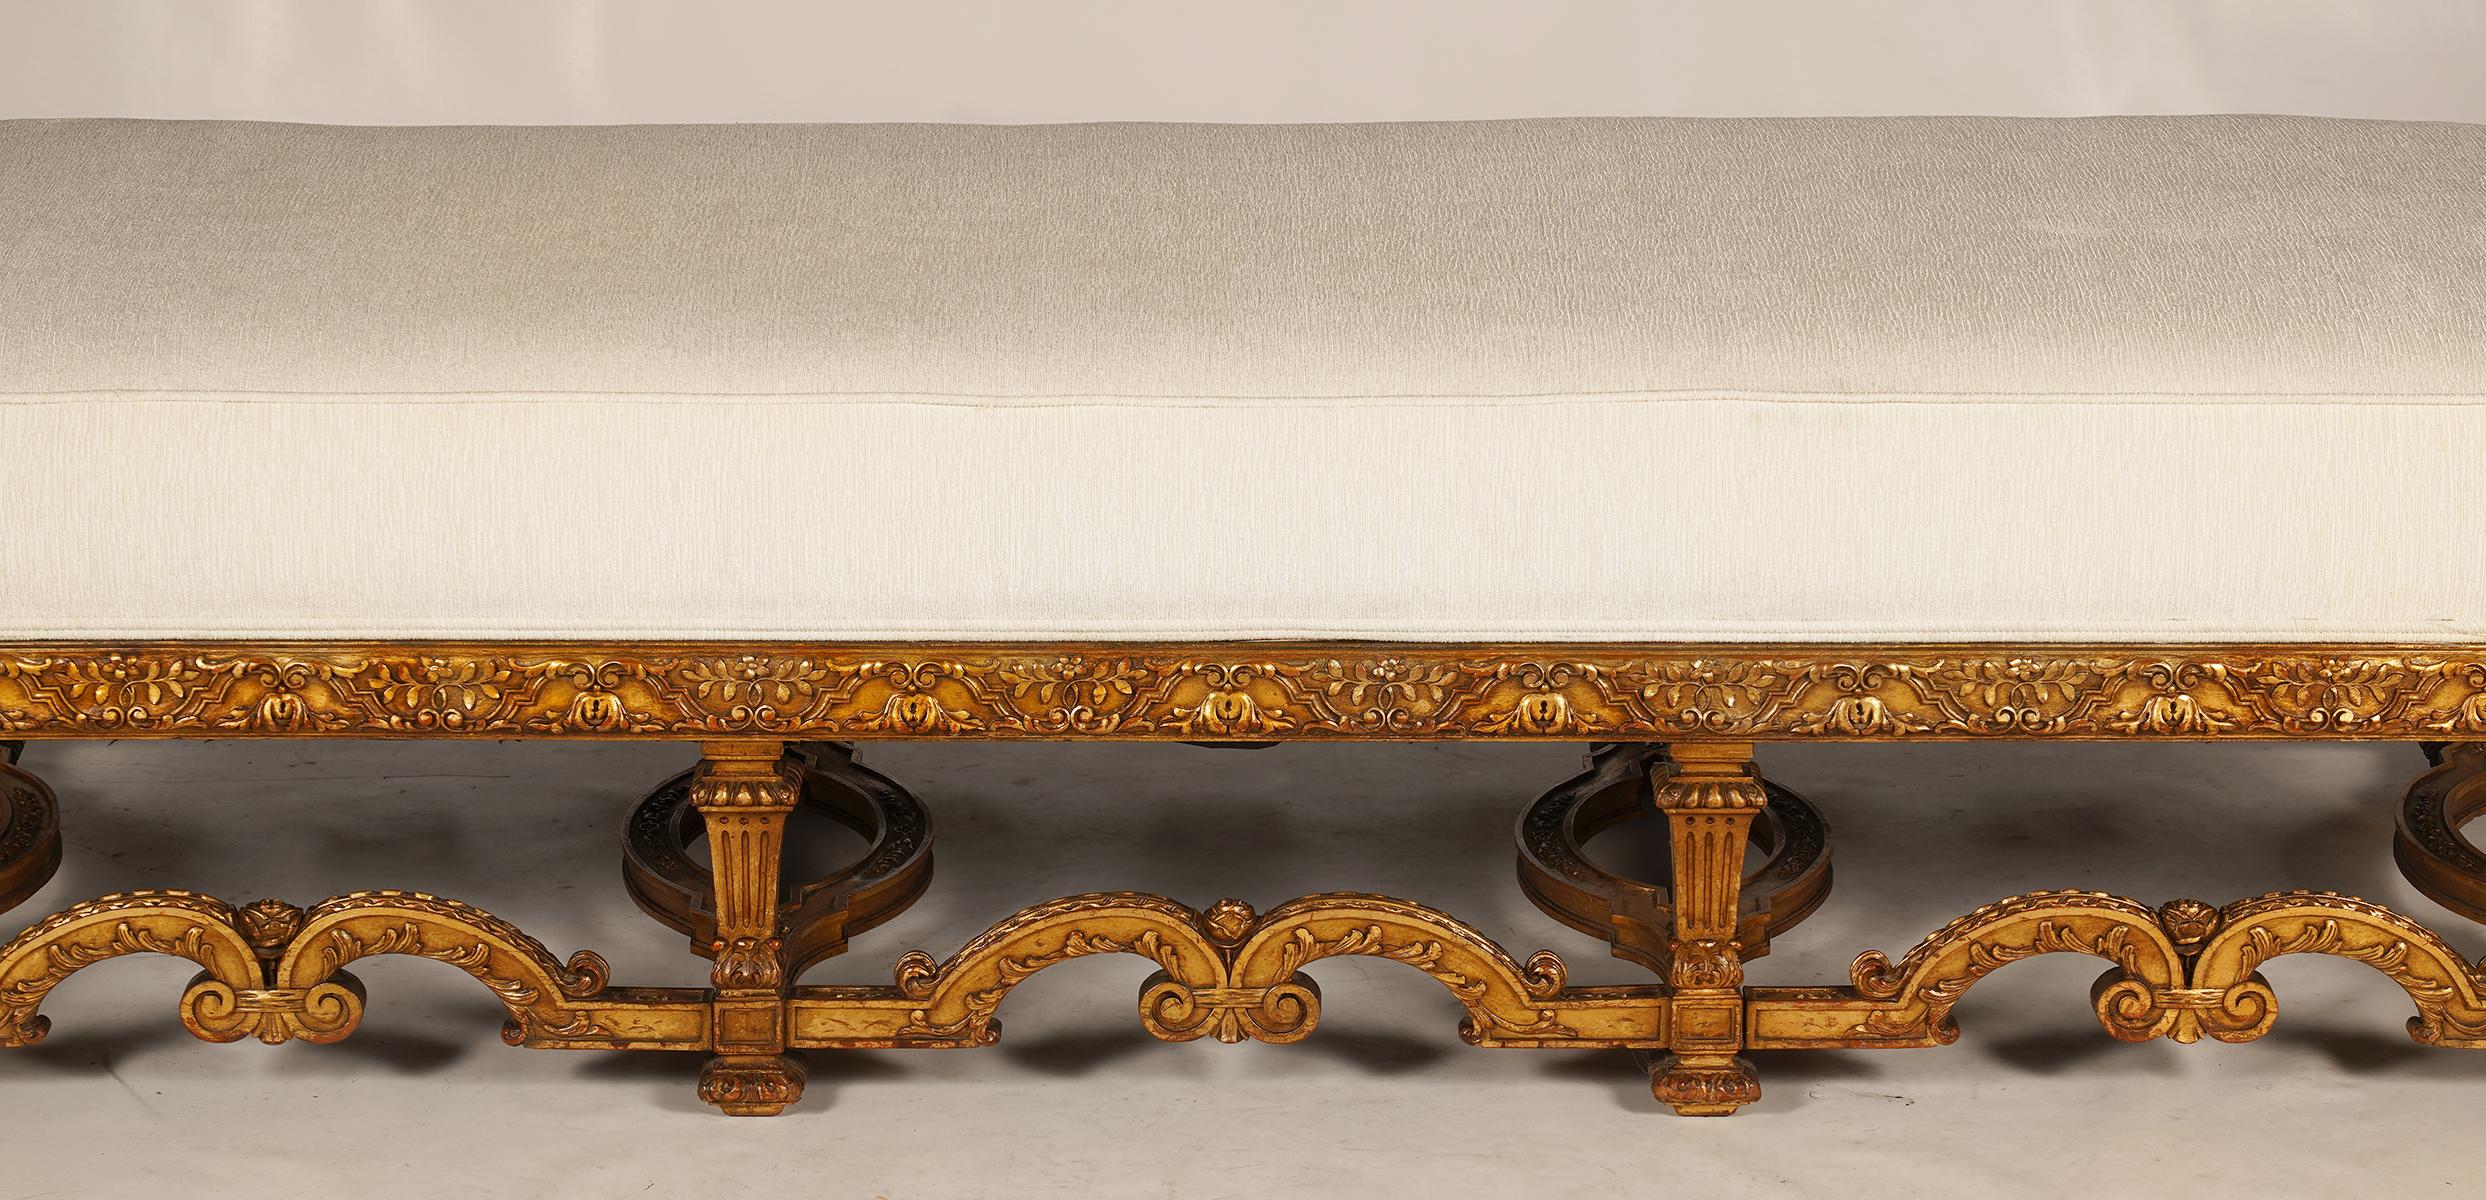 19th Century French Louis XIV Style Carved Giltwood Bench with Mint Upholstery 4